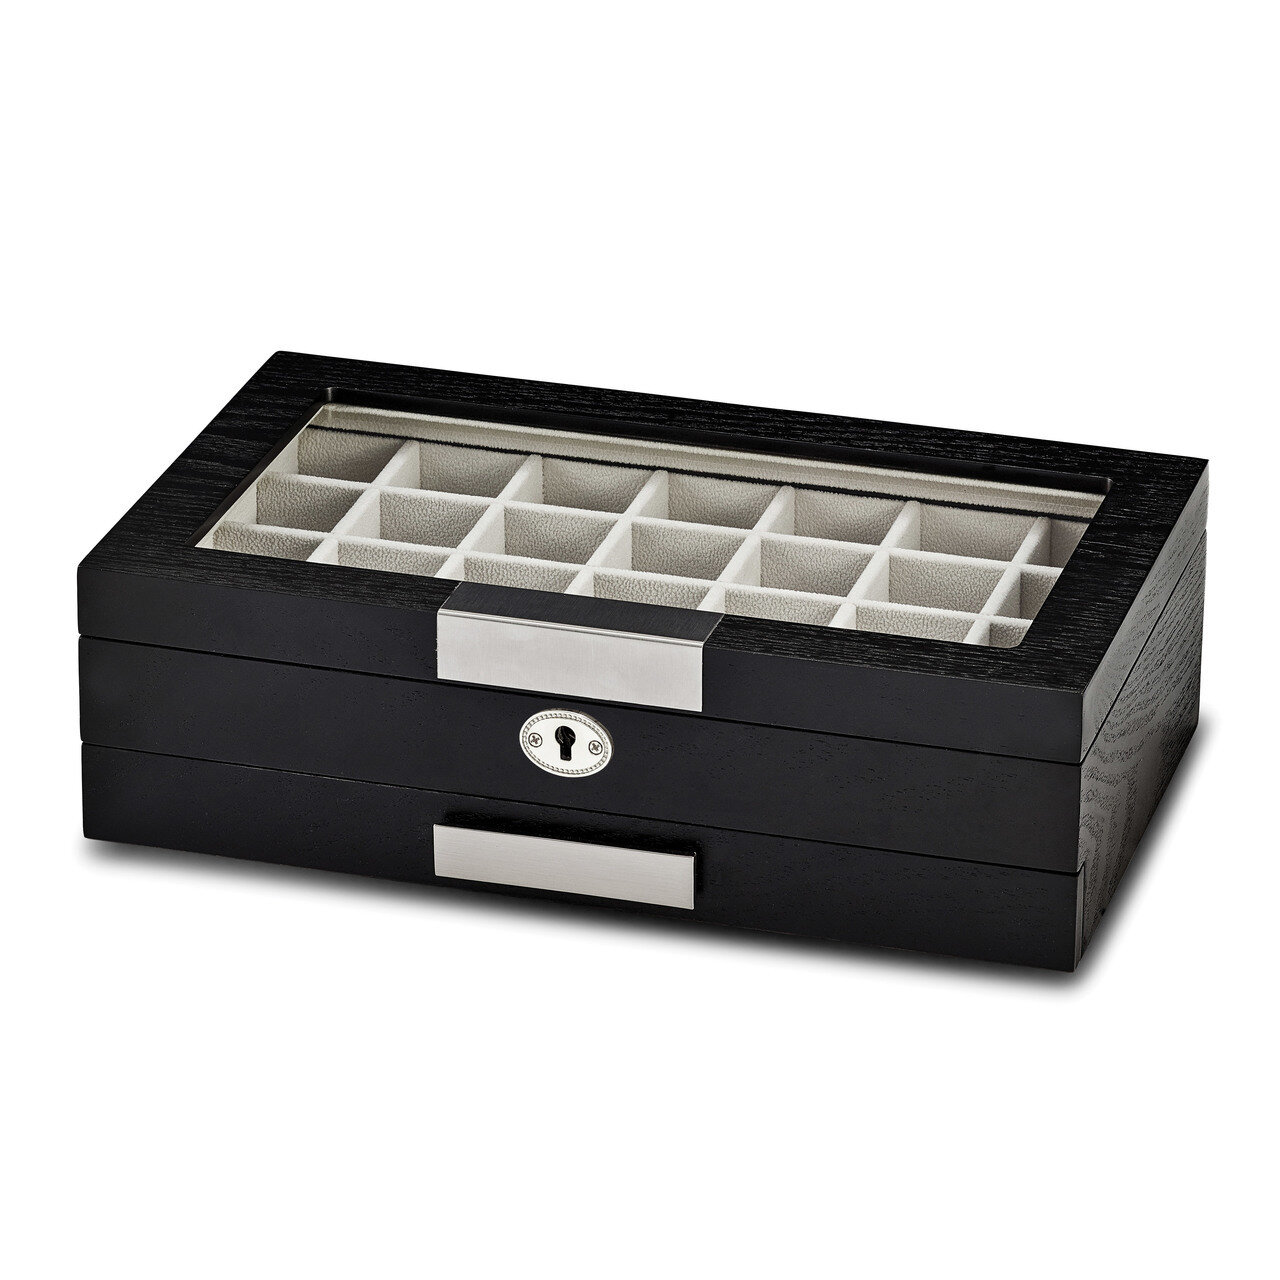 Matte Black Wood Composite 56-section Earring Cuff Link Box by Jere